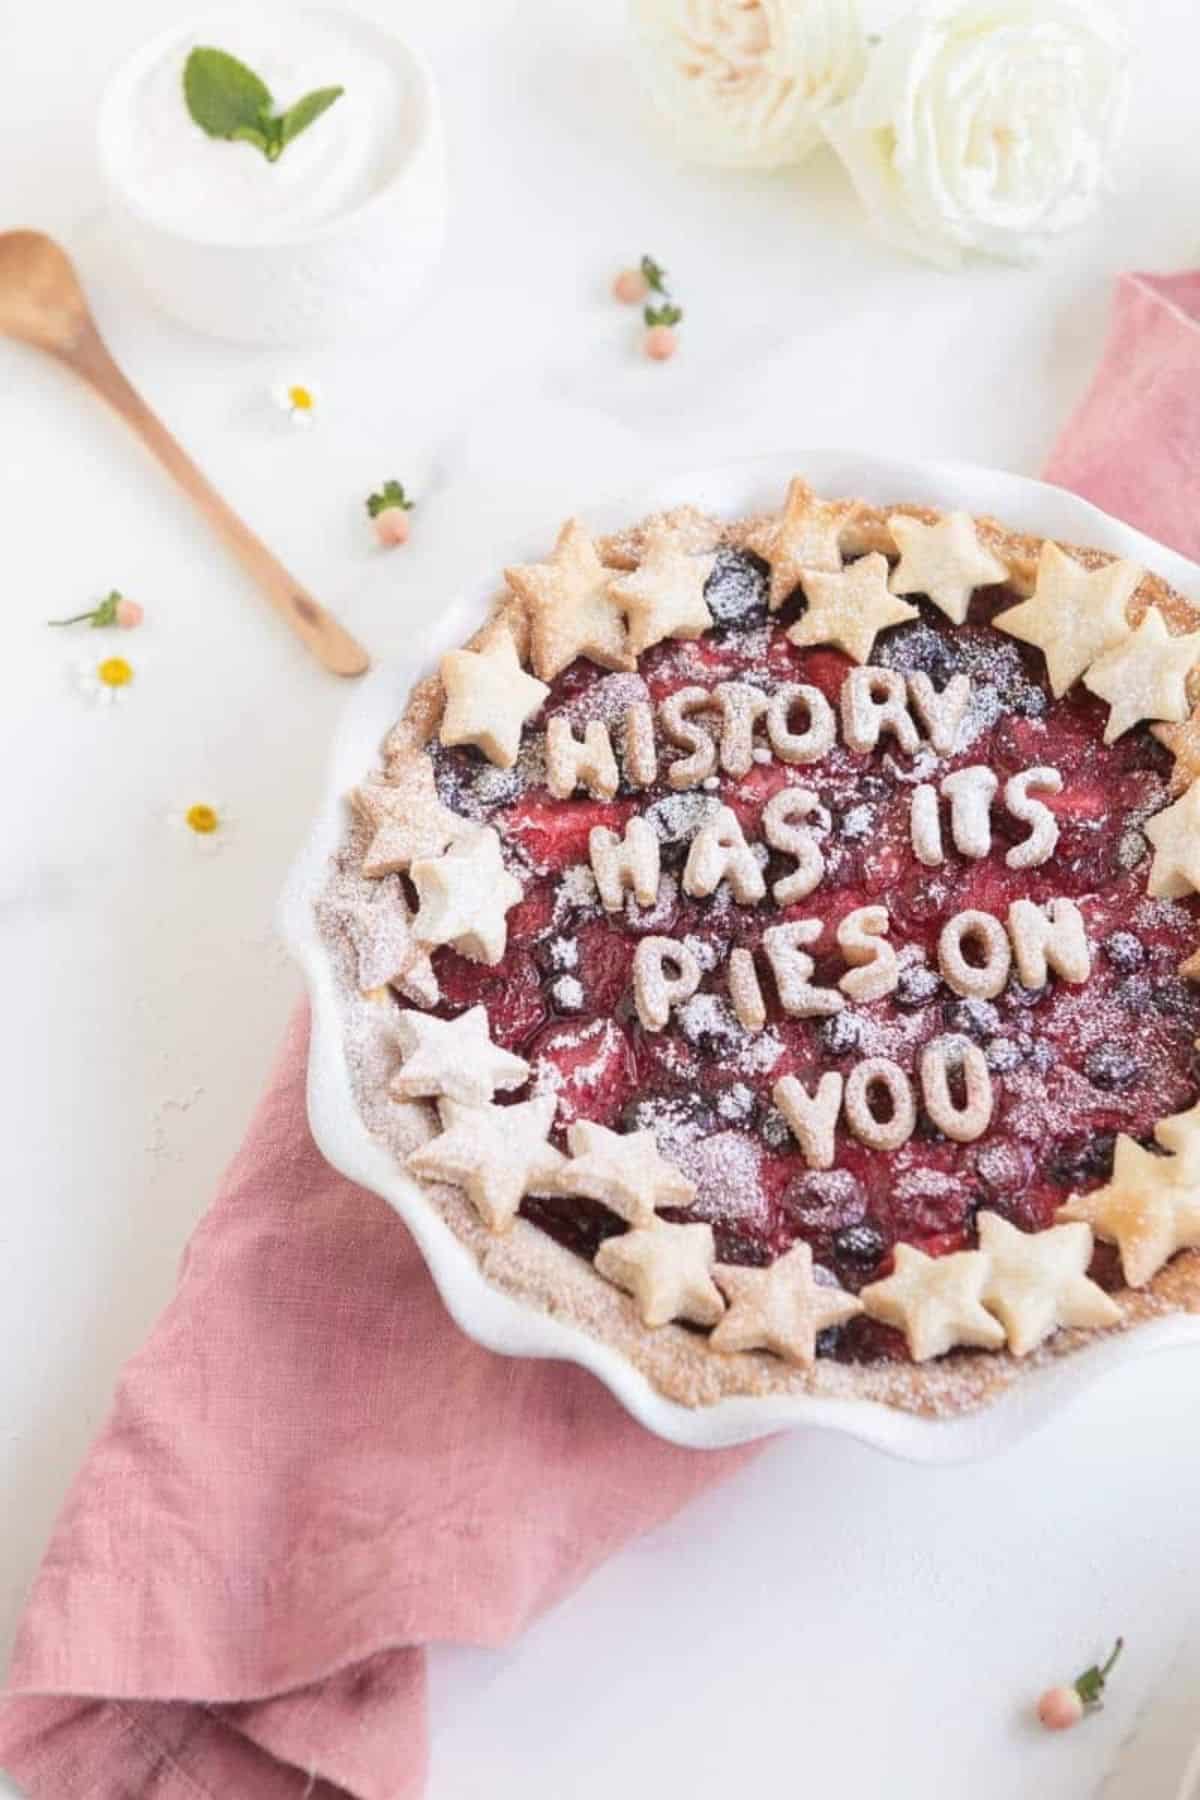 Mixed Berry Pie with Lettered Top